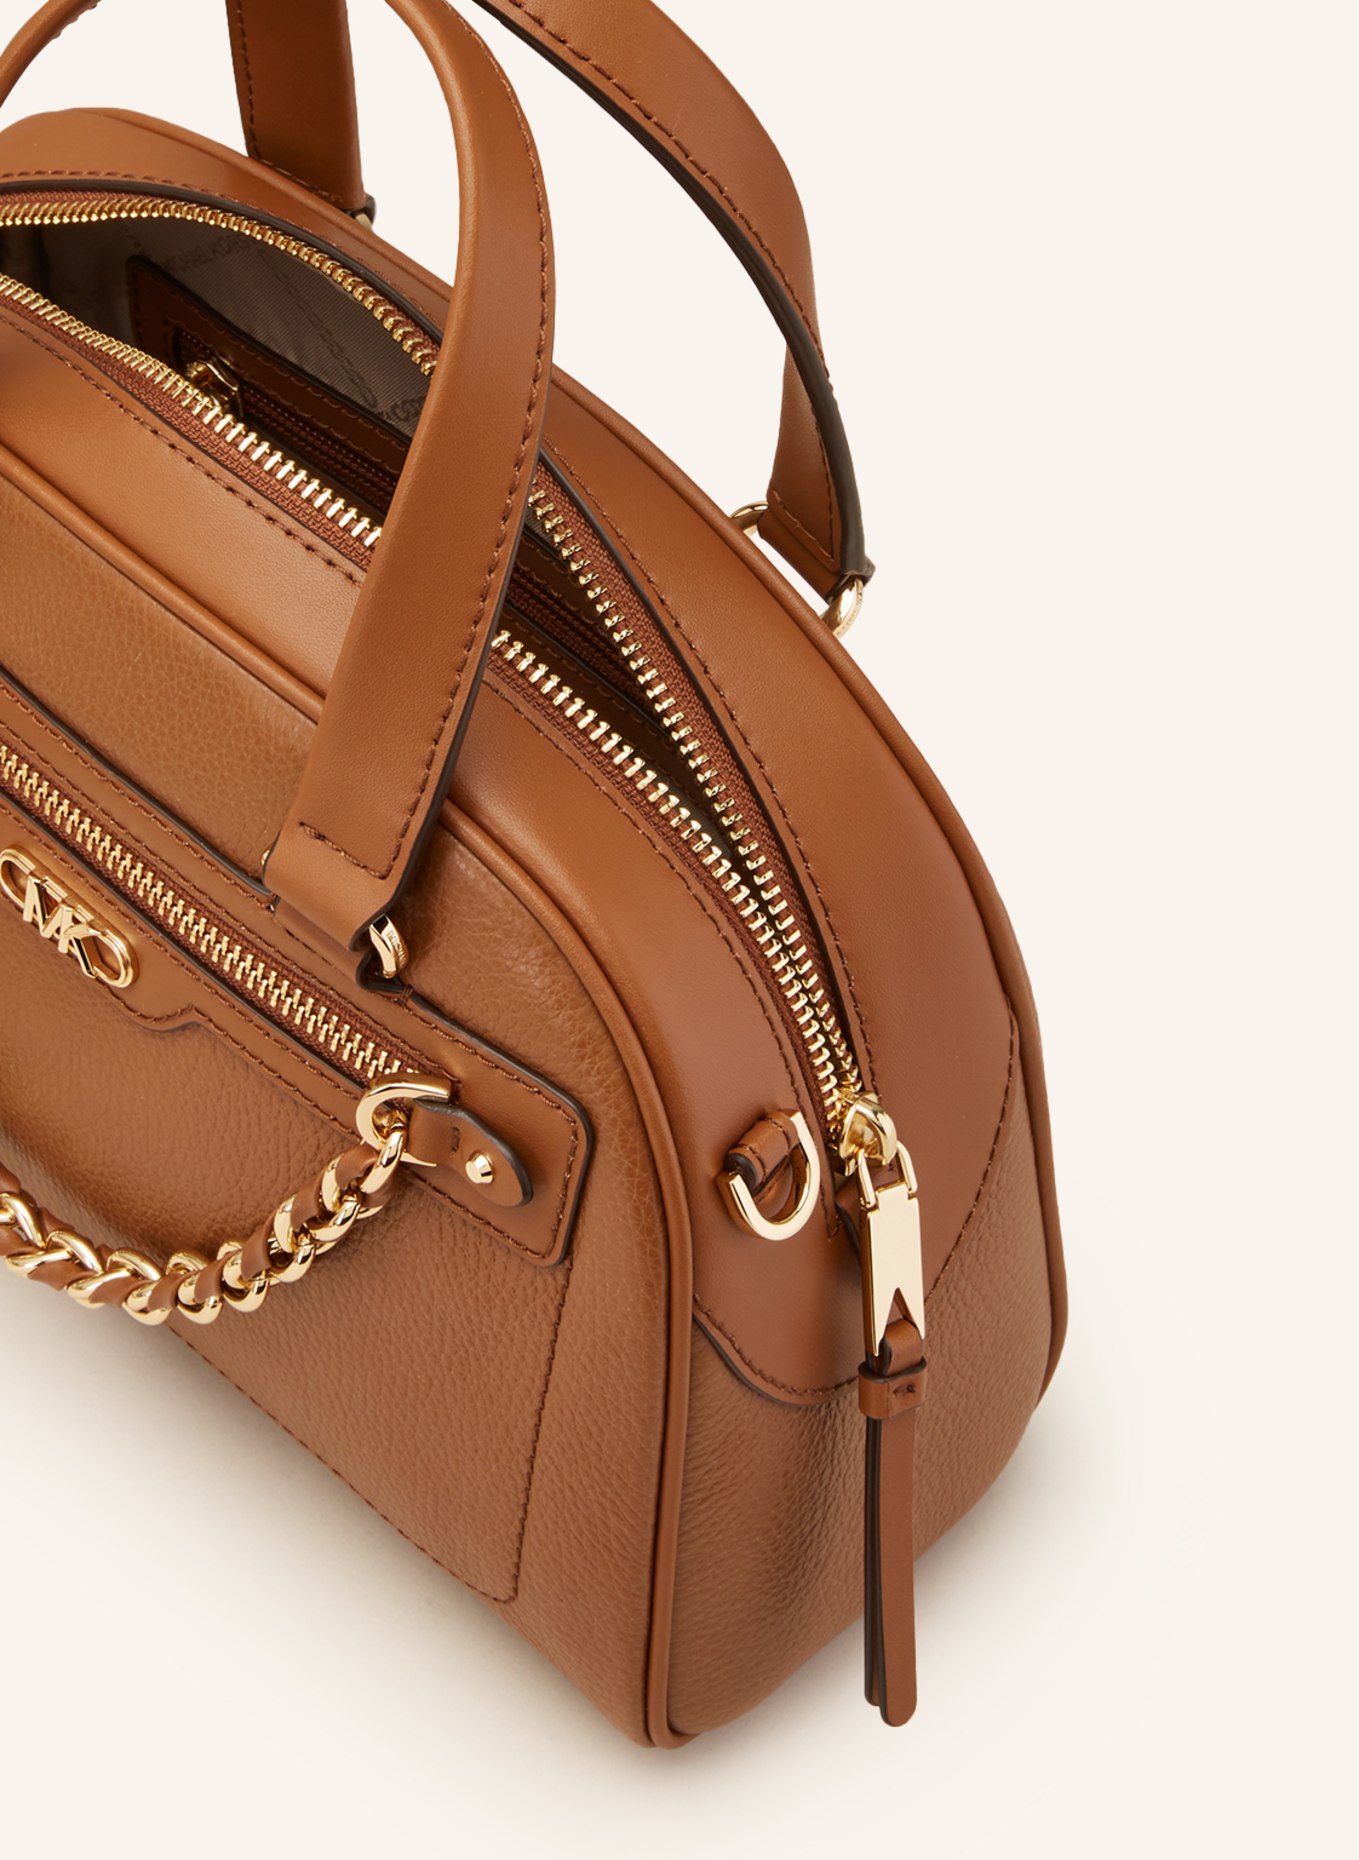 Michael Kors Collection Fall 2019 Ready-to-Wear Collection | Bags, Handbags  michael kors, Purses and bags